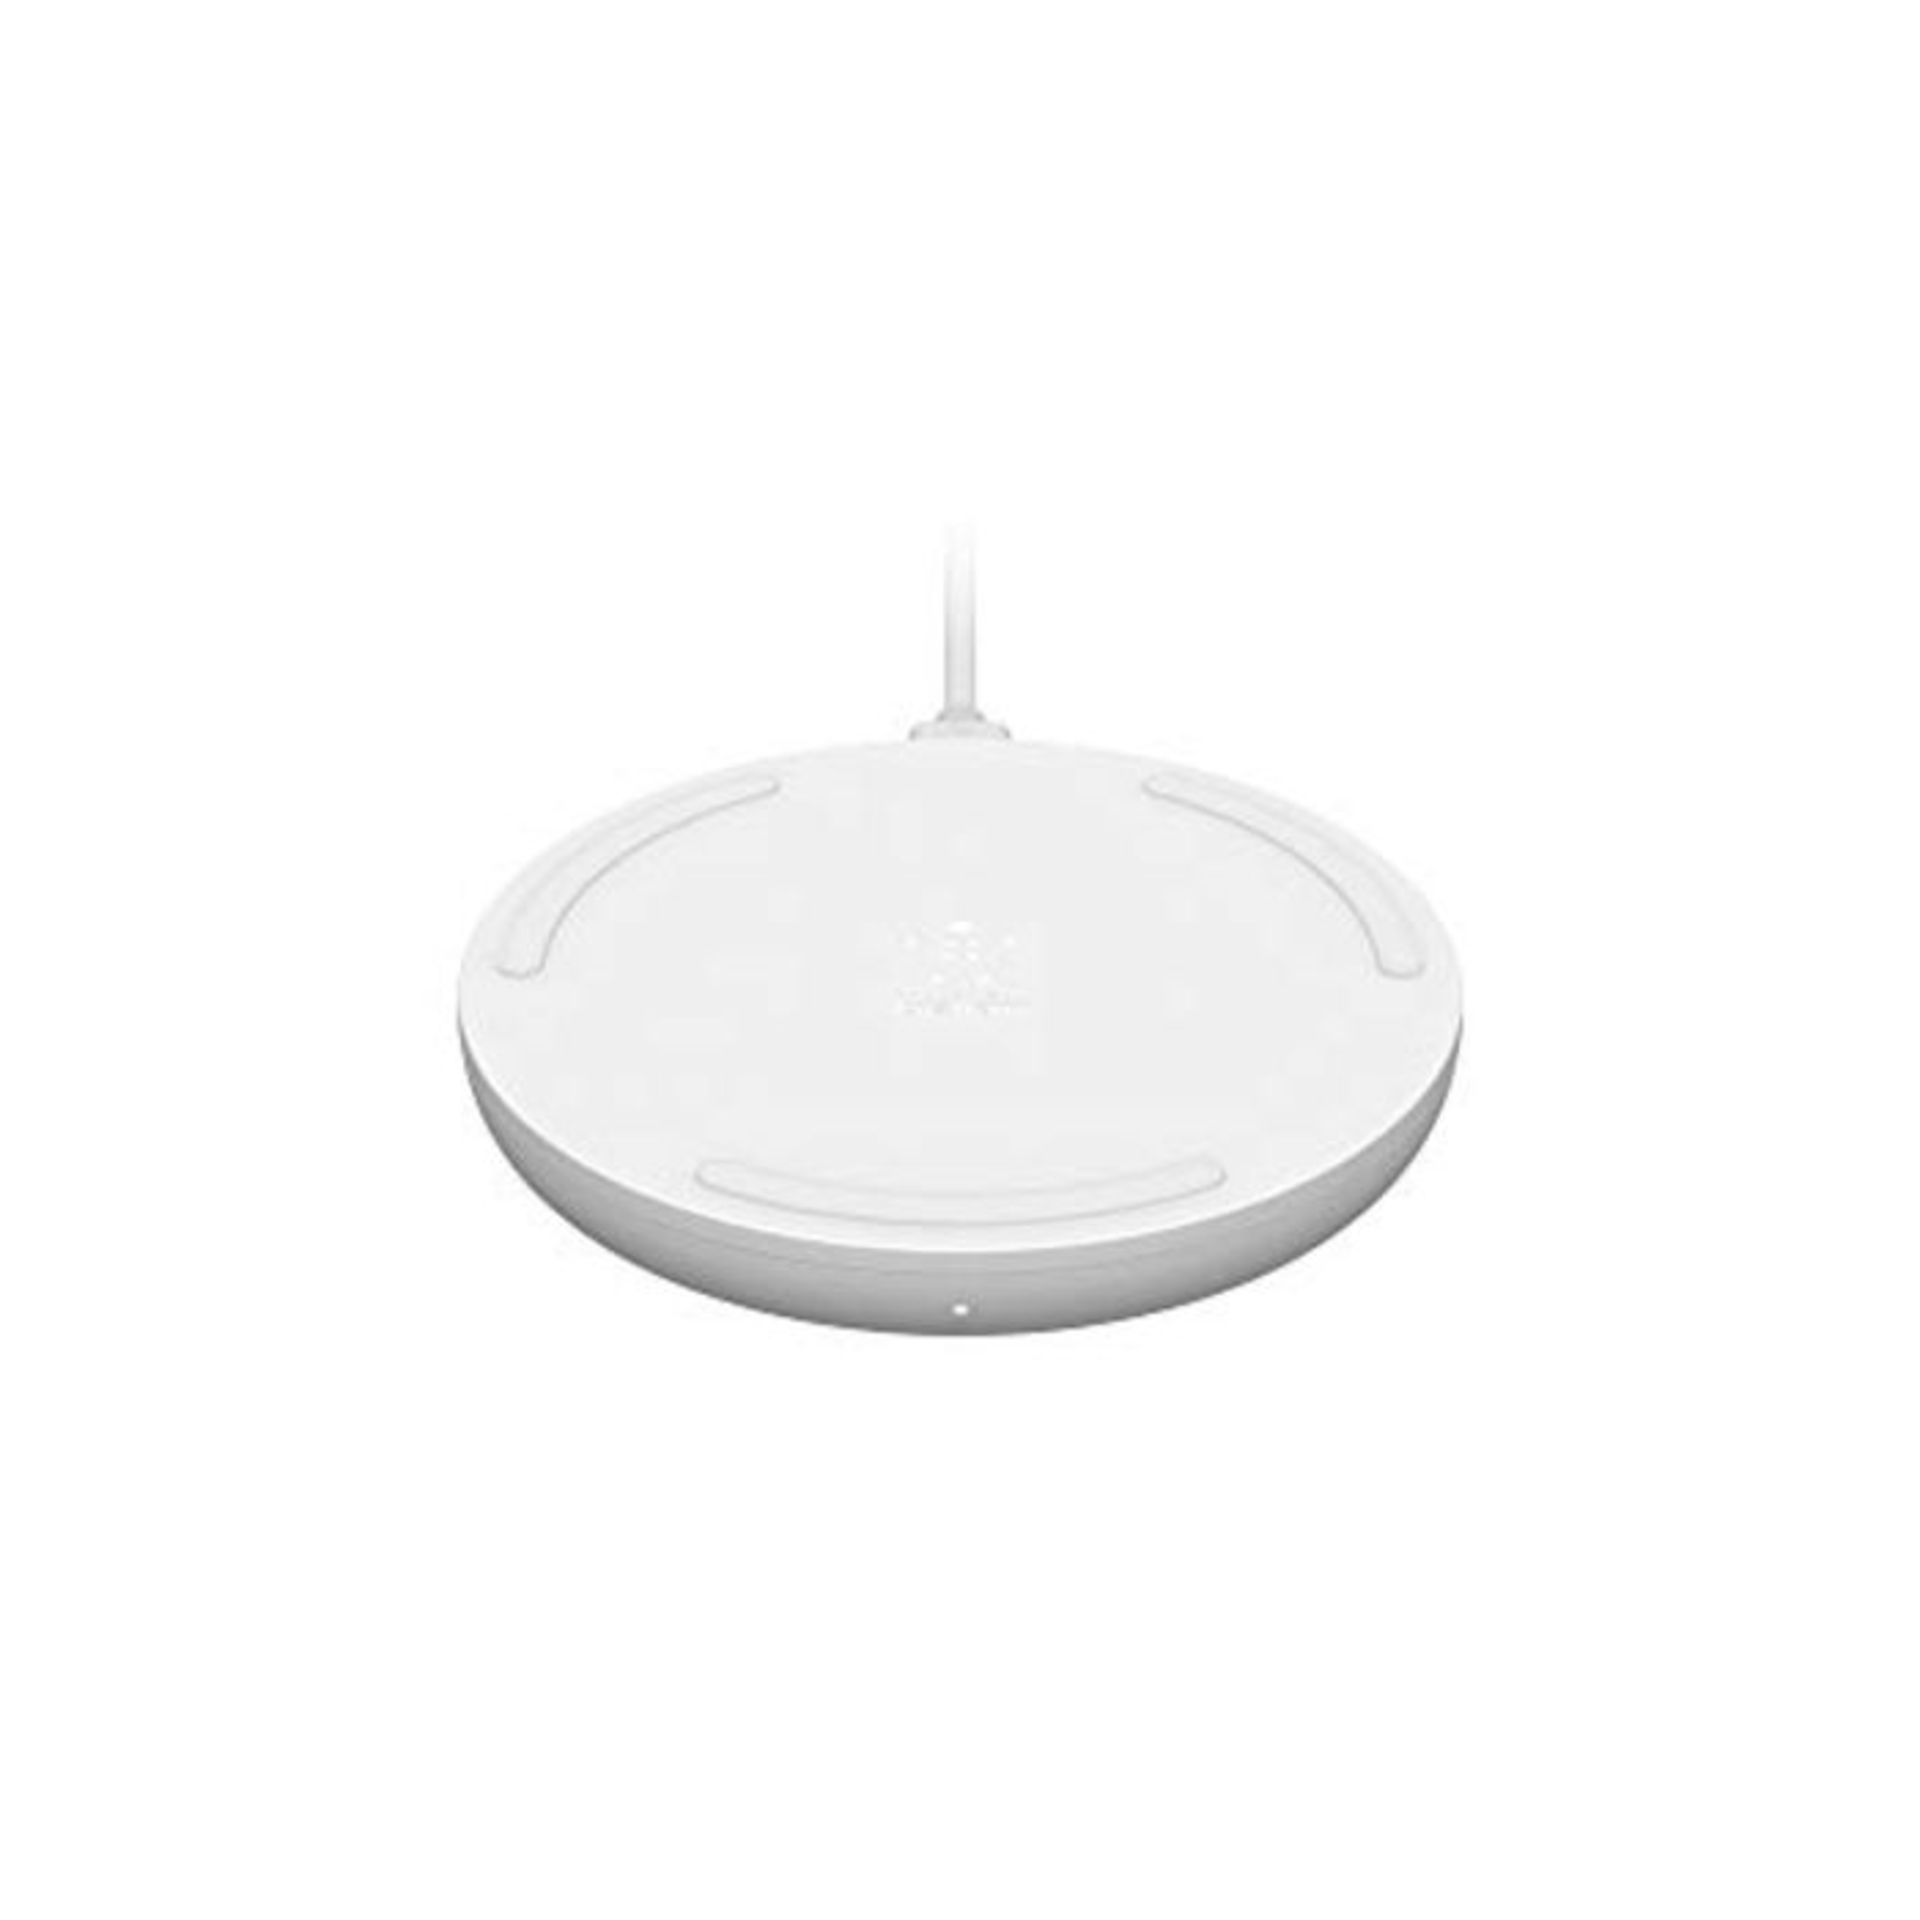 Belkin Boost Charge Wireless Charging Pad 10 W (Qi-Certified Fast Wireless Charger for